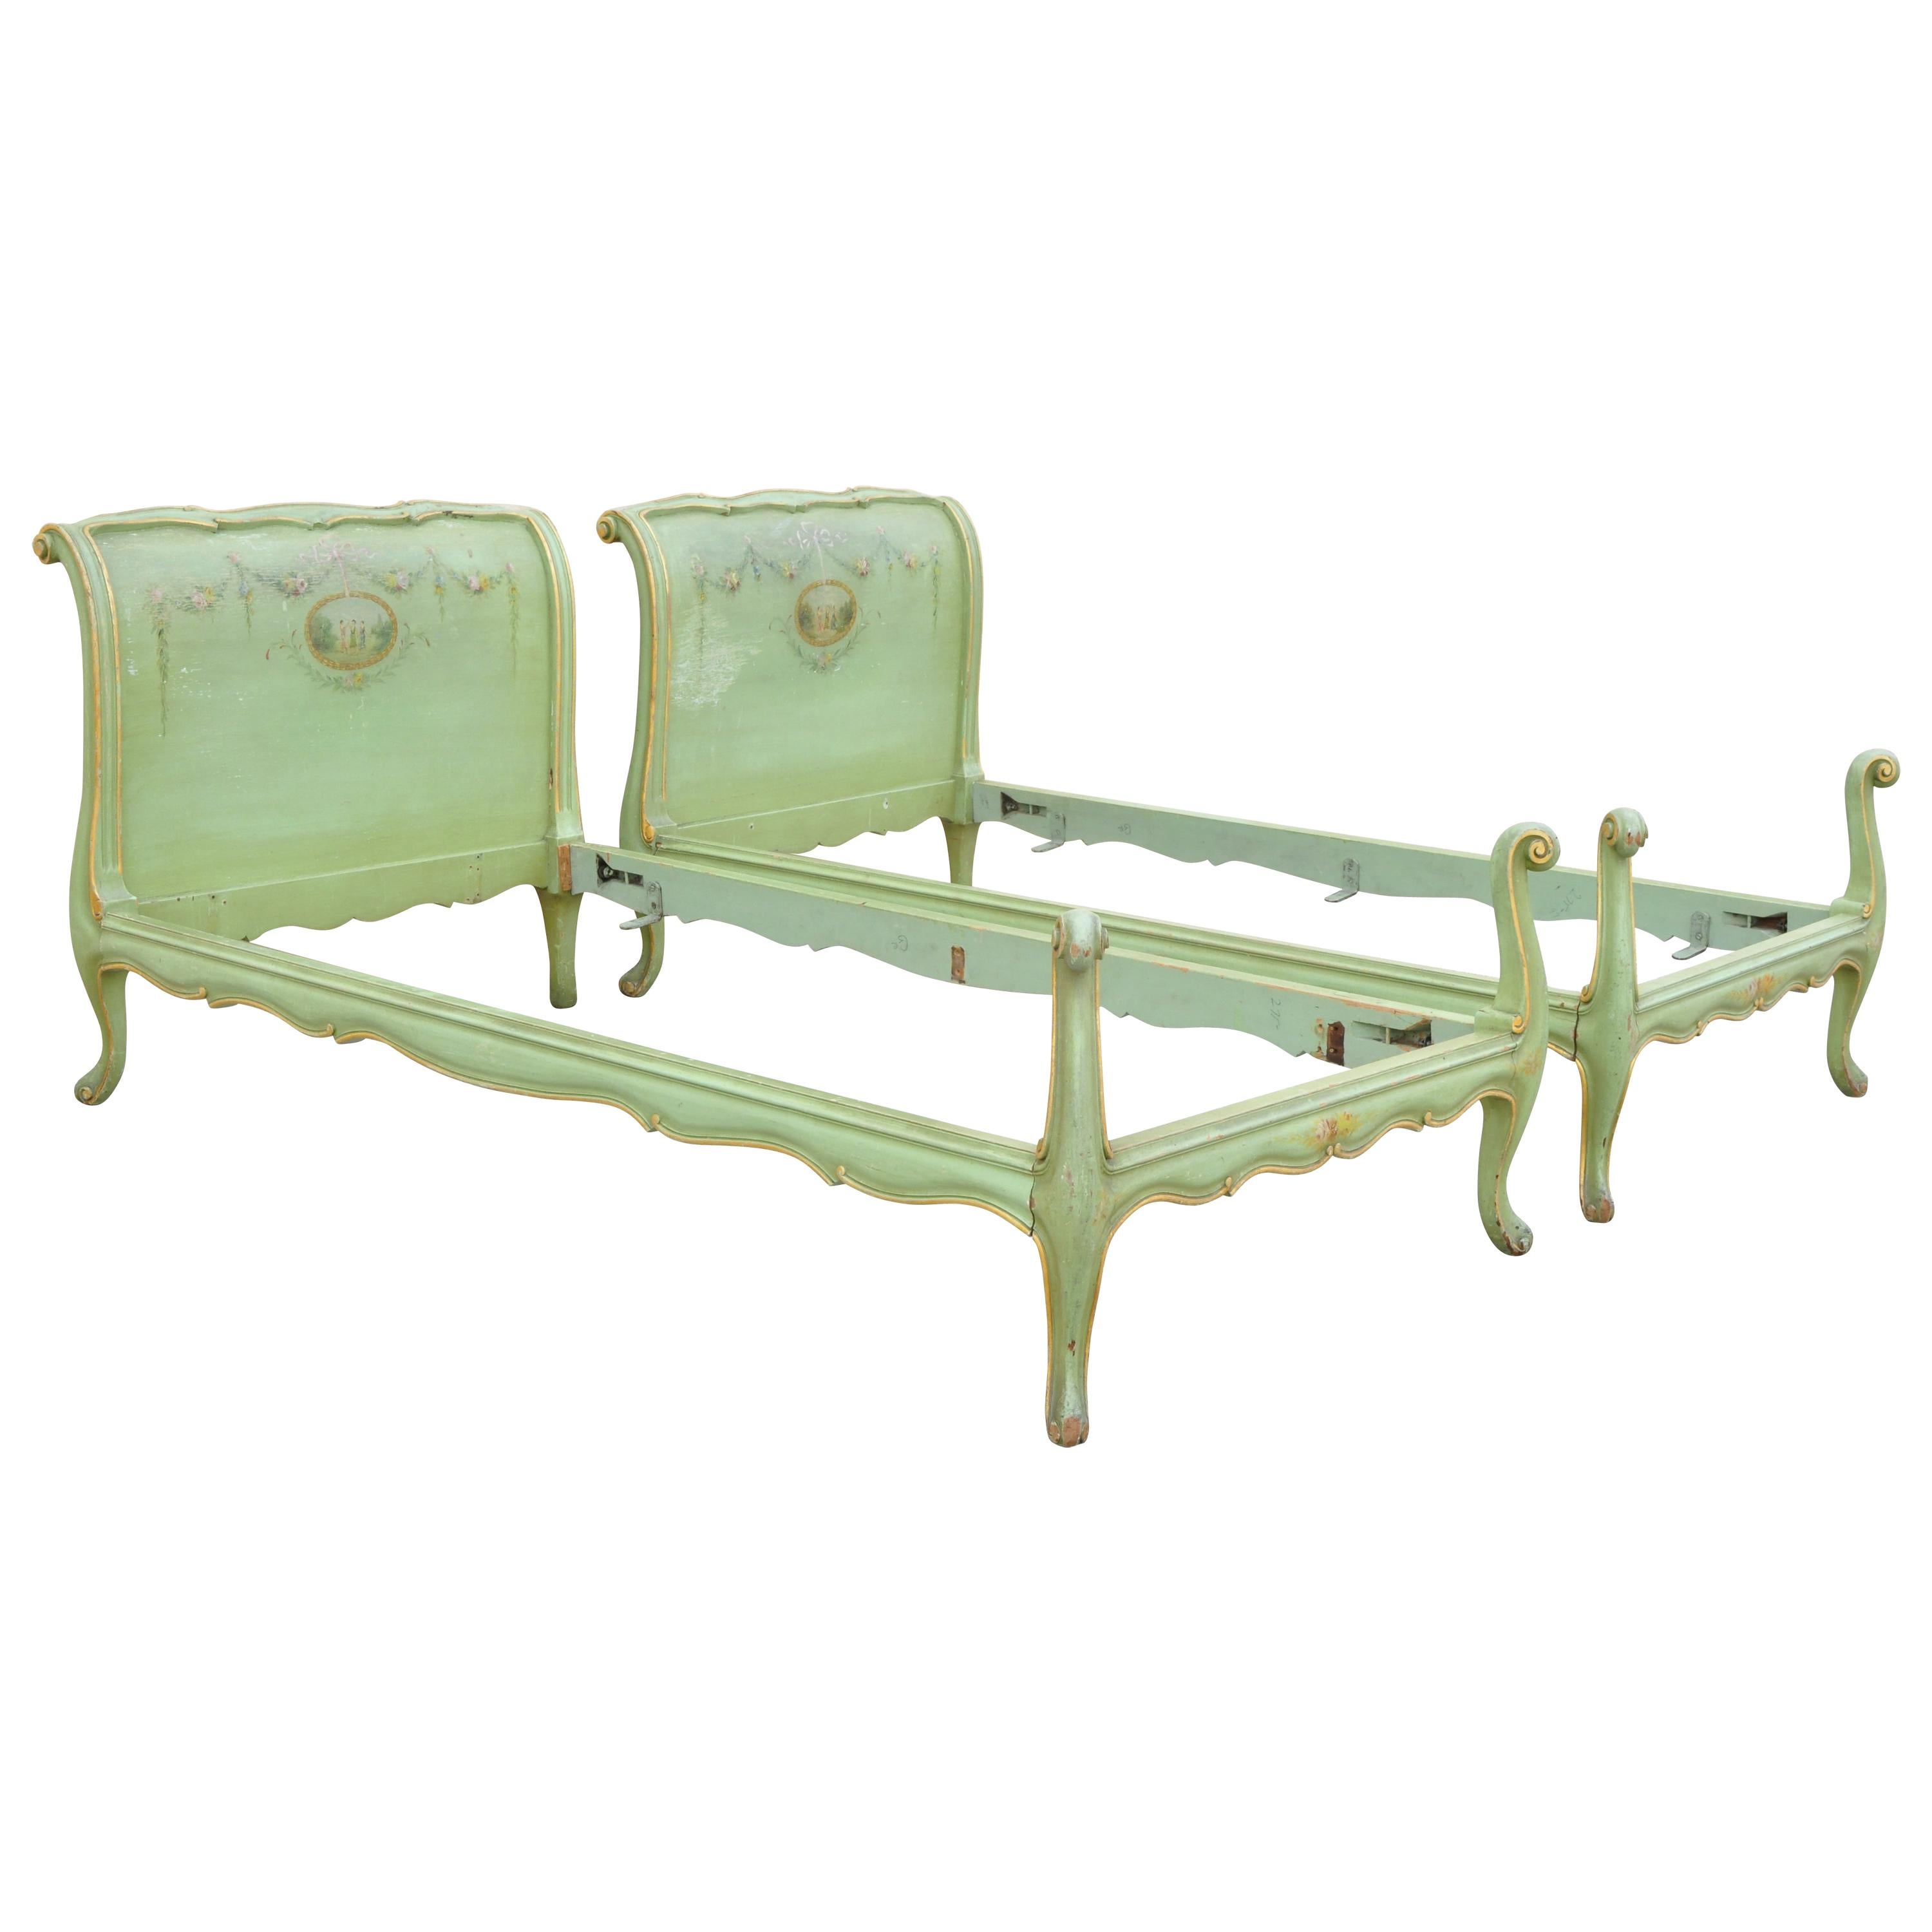 Pair of Antique French Louis XV Green Distress Painted European Twin Bed Frames